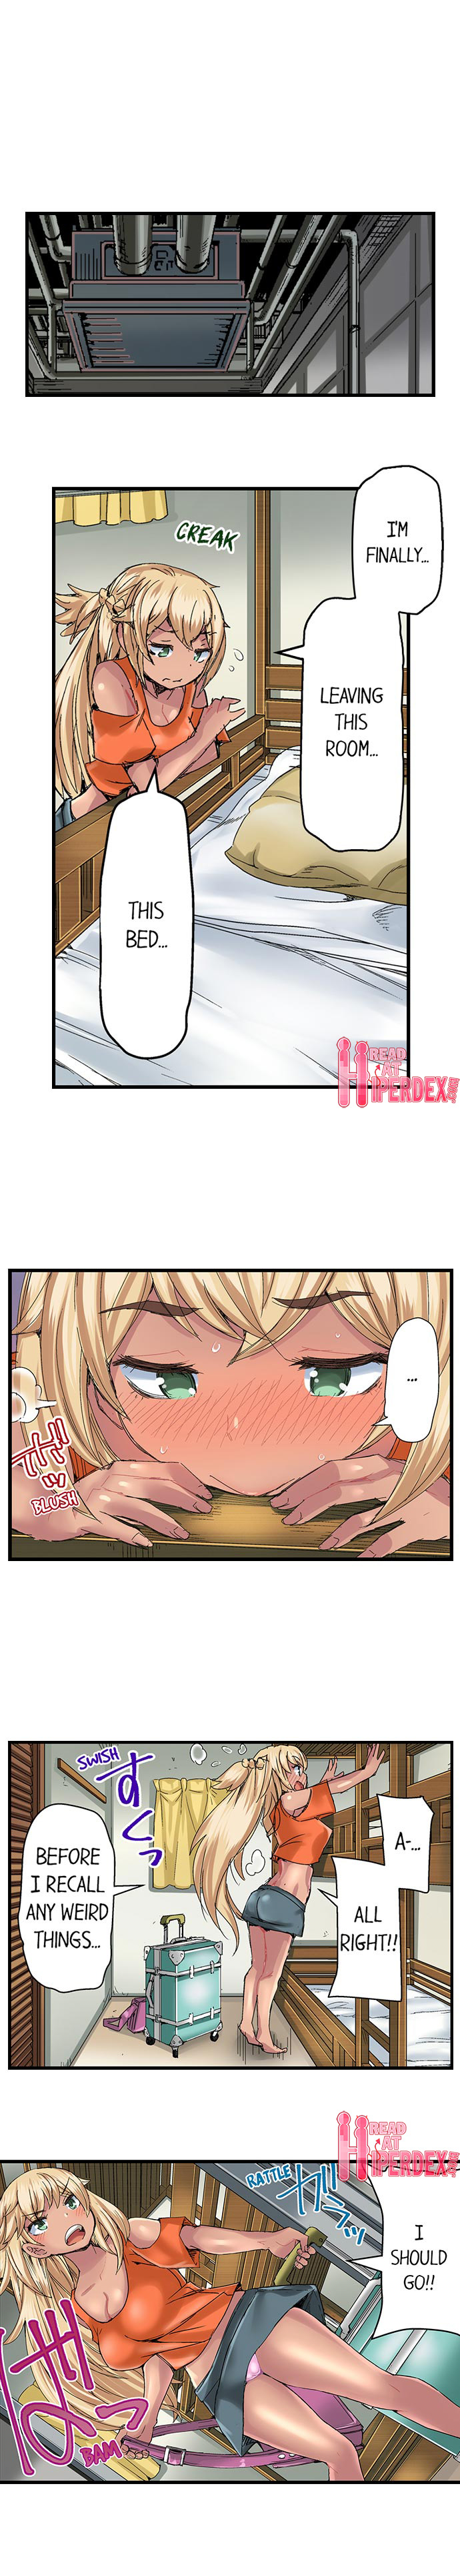 Taking a Hot Tanned Chick’s Virginity - Chapter 38 Page 8